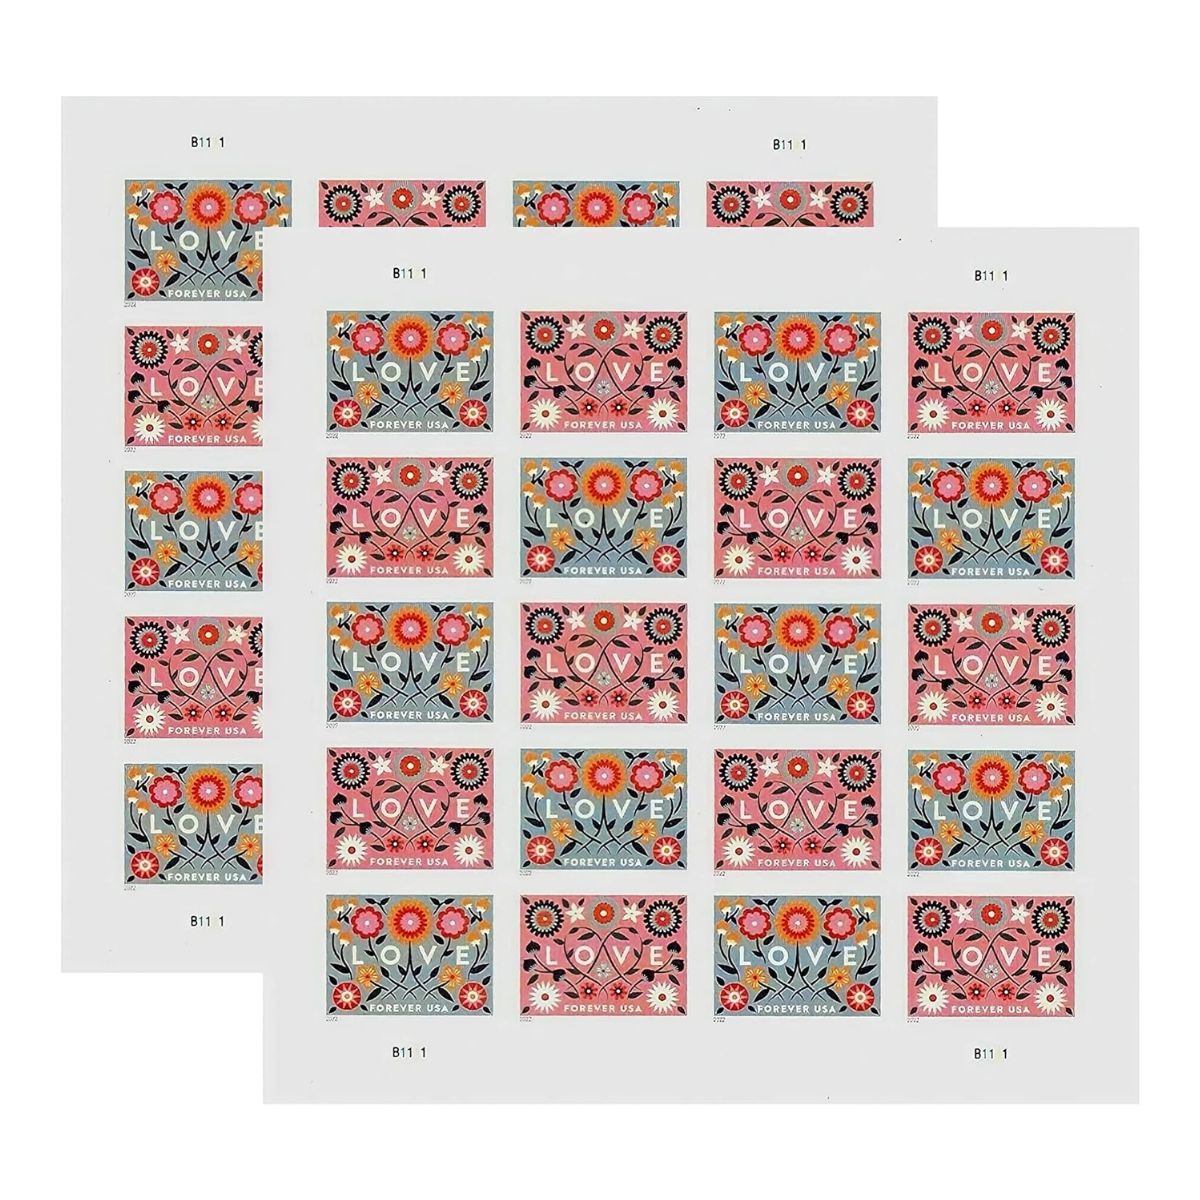 Lovely Love Forever Postage Stamps 2 Sheets